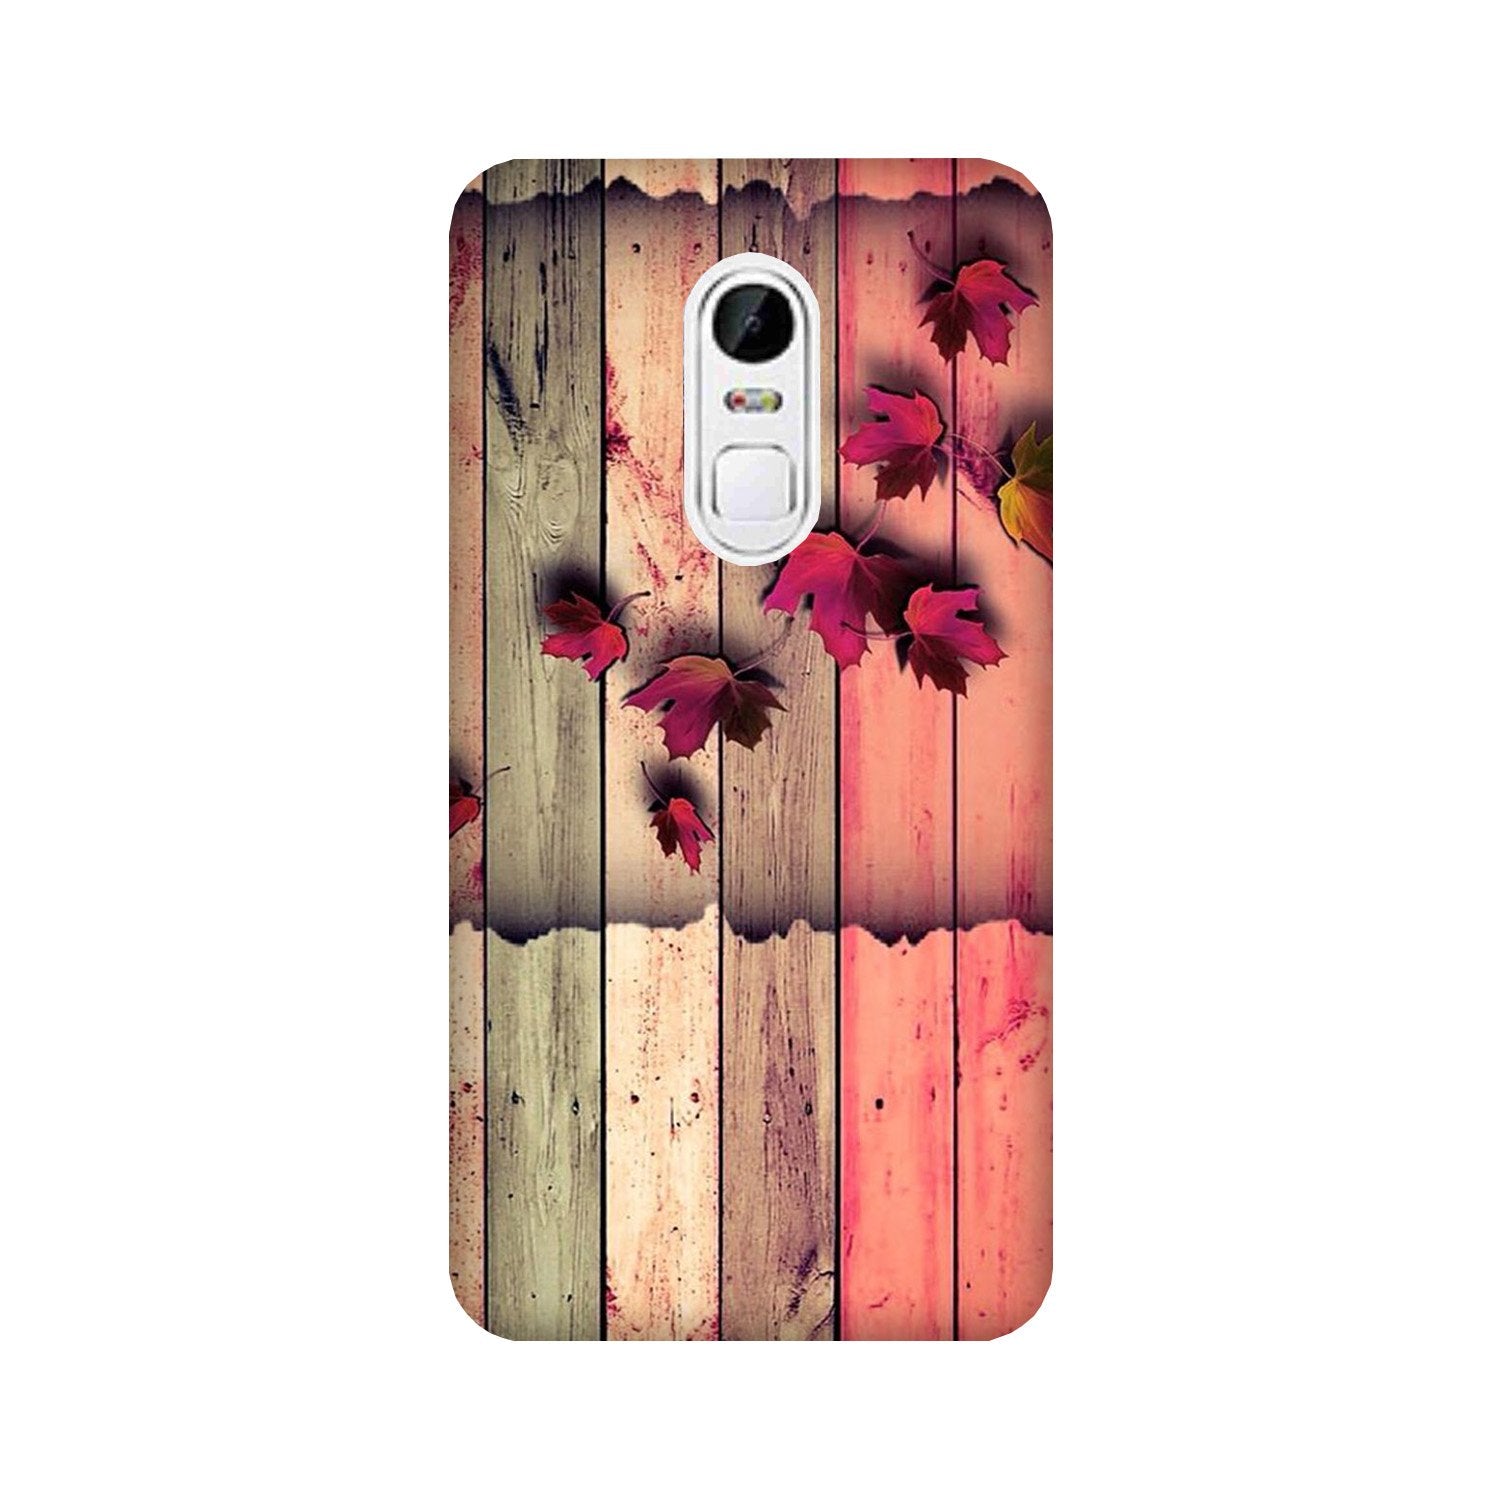 Wooden look2 Case for Lenovo Vibe X3